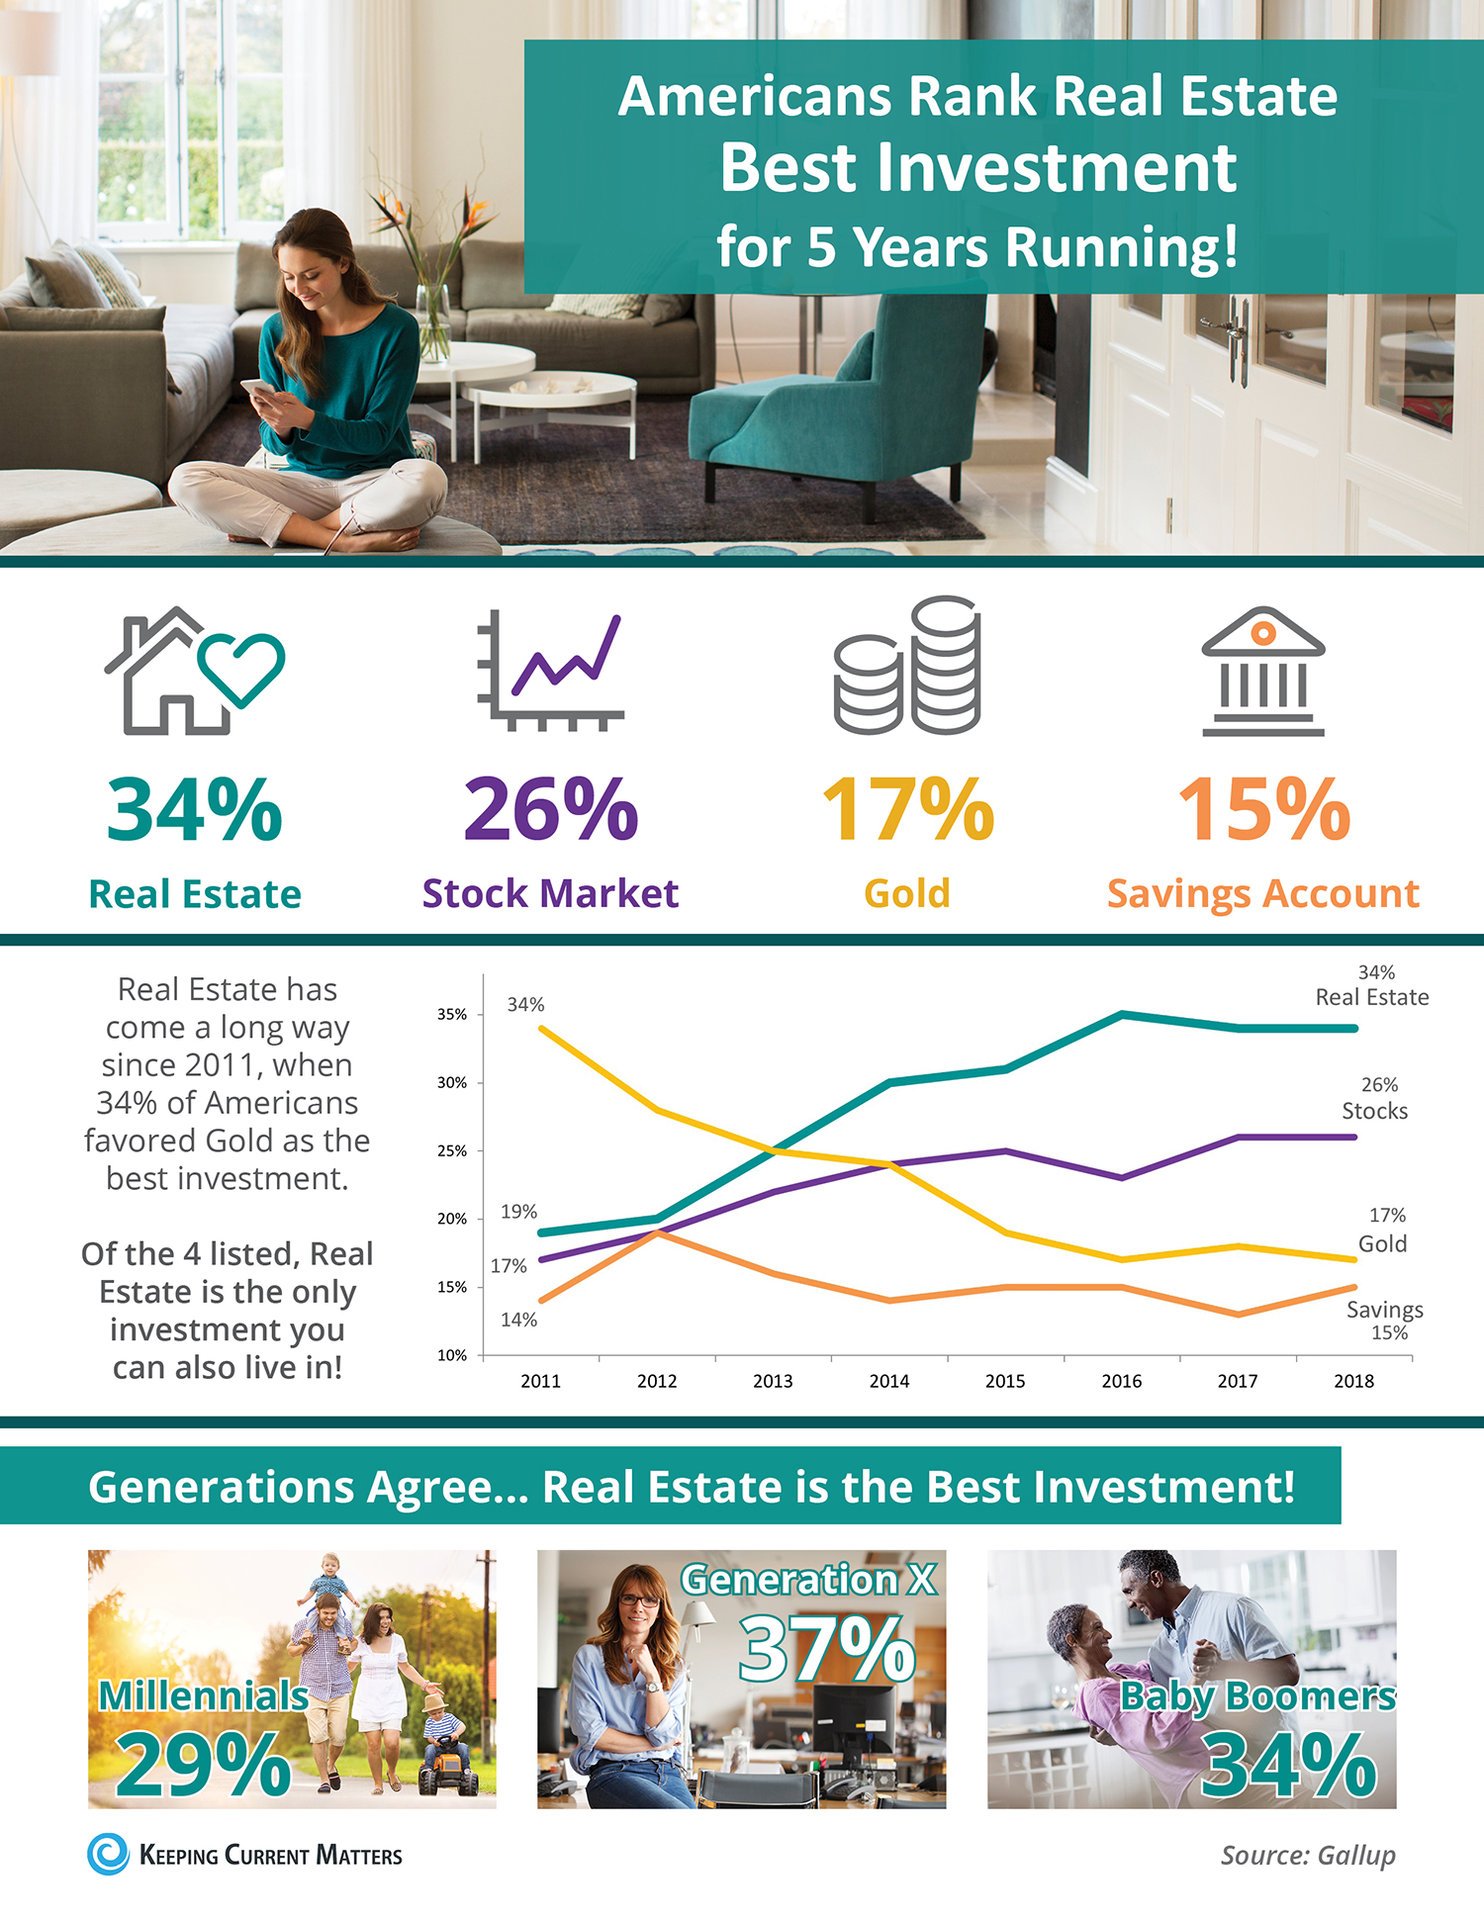 Americans Rank Real Estate Best Investment for 5 Years Running! [INFOGRAPHIC] | Keeping Current Matters